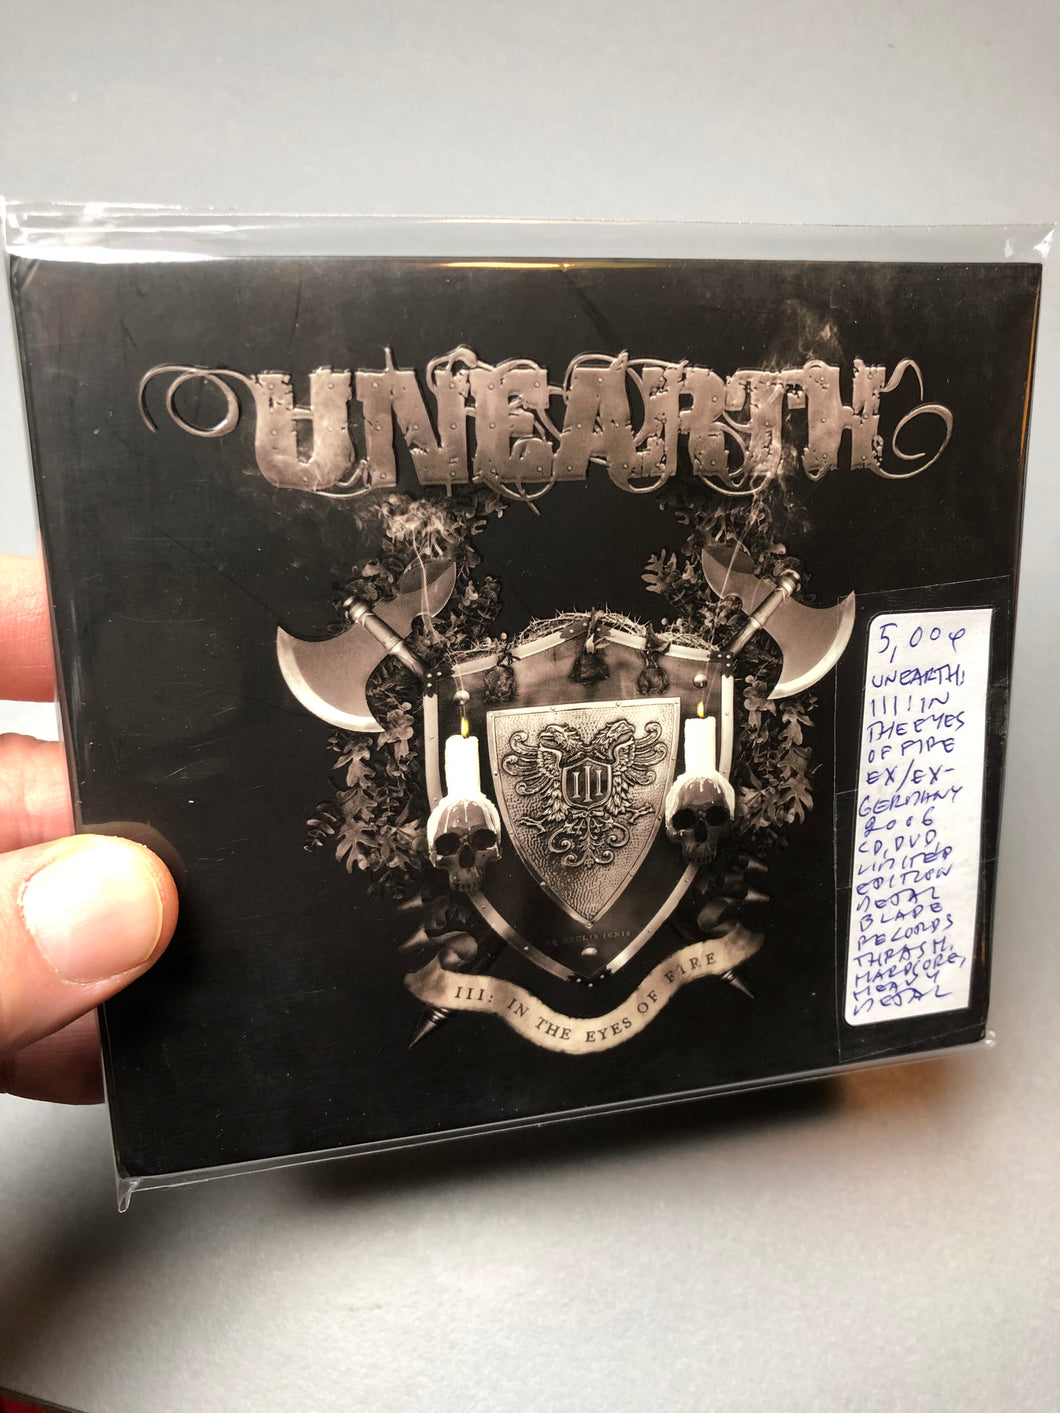 Unearth - III: In The Eyes Of Fire, Germany 2006, Limited Edition